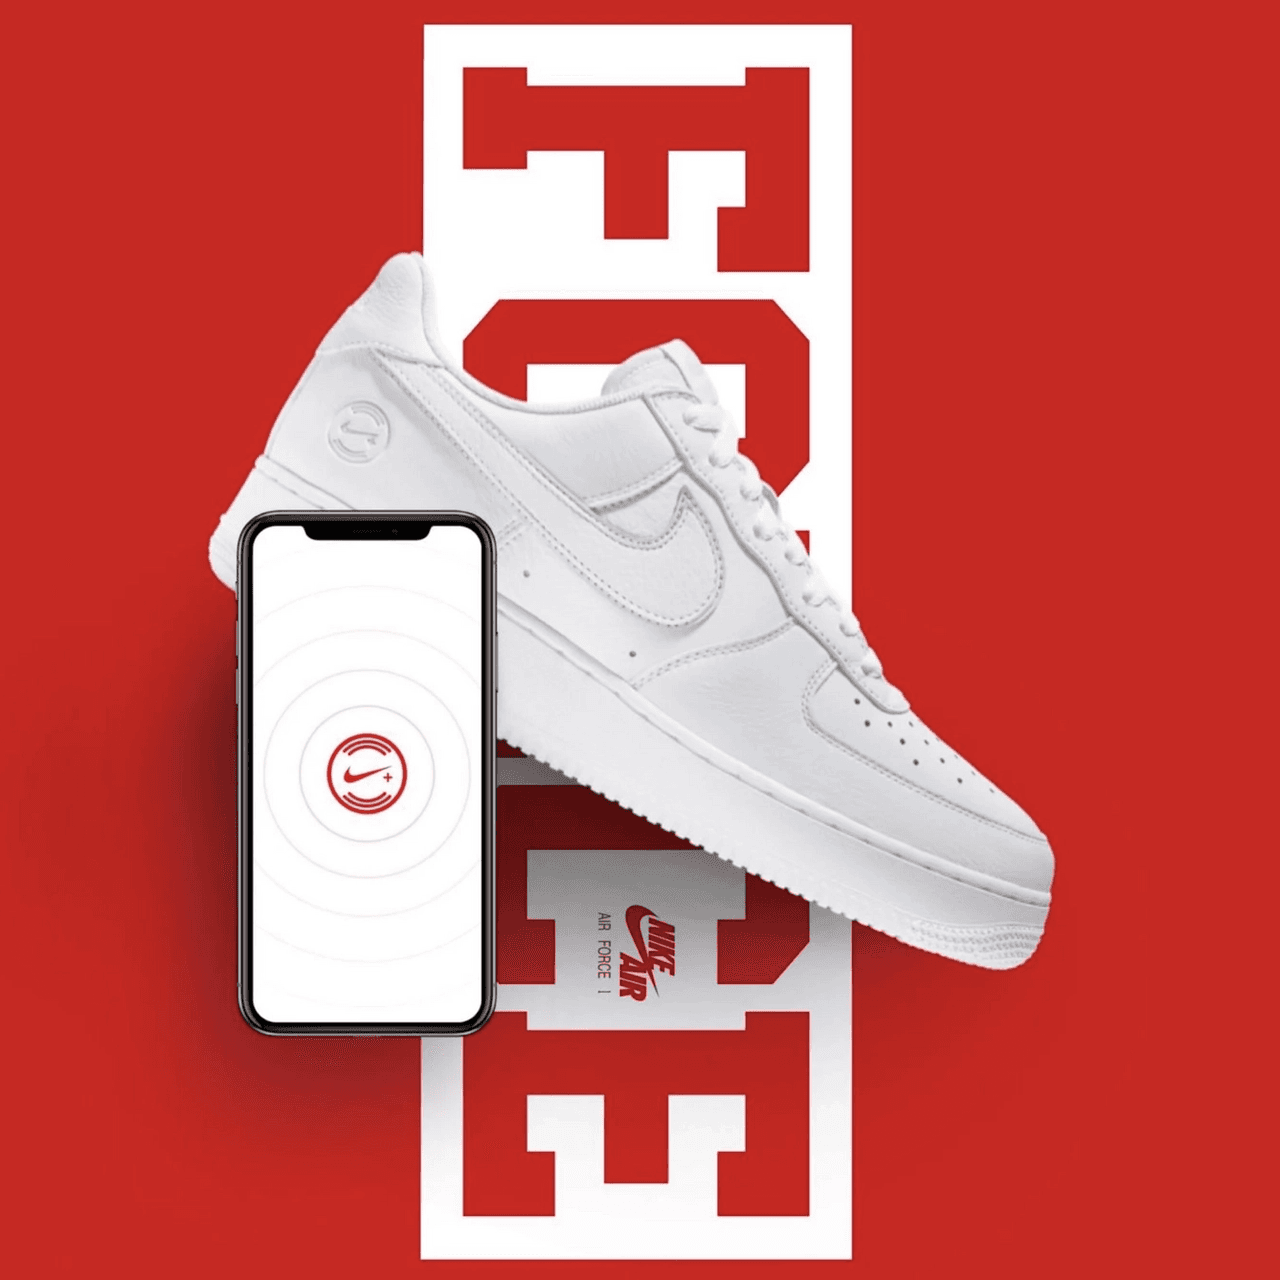 The Nike Air Force 1 NikeConnect QS Let's You Cop Exclusive Releases - Sneaker